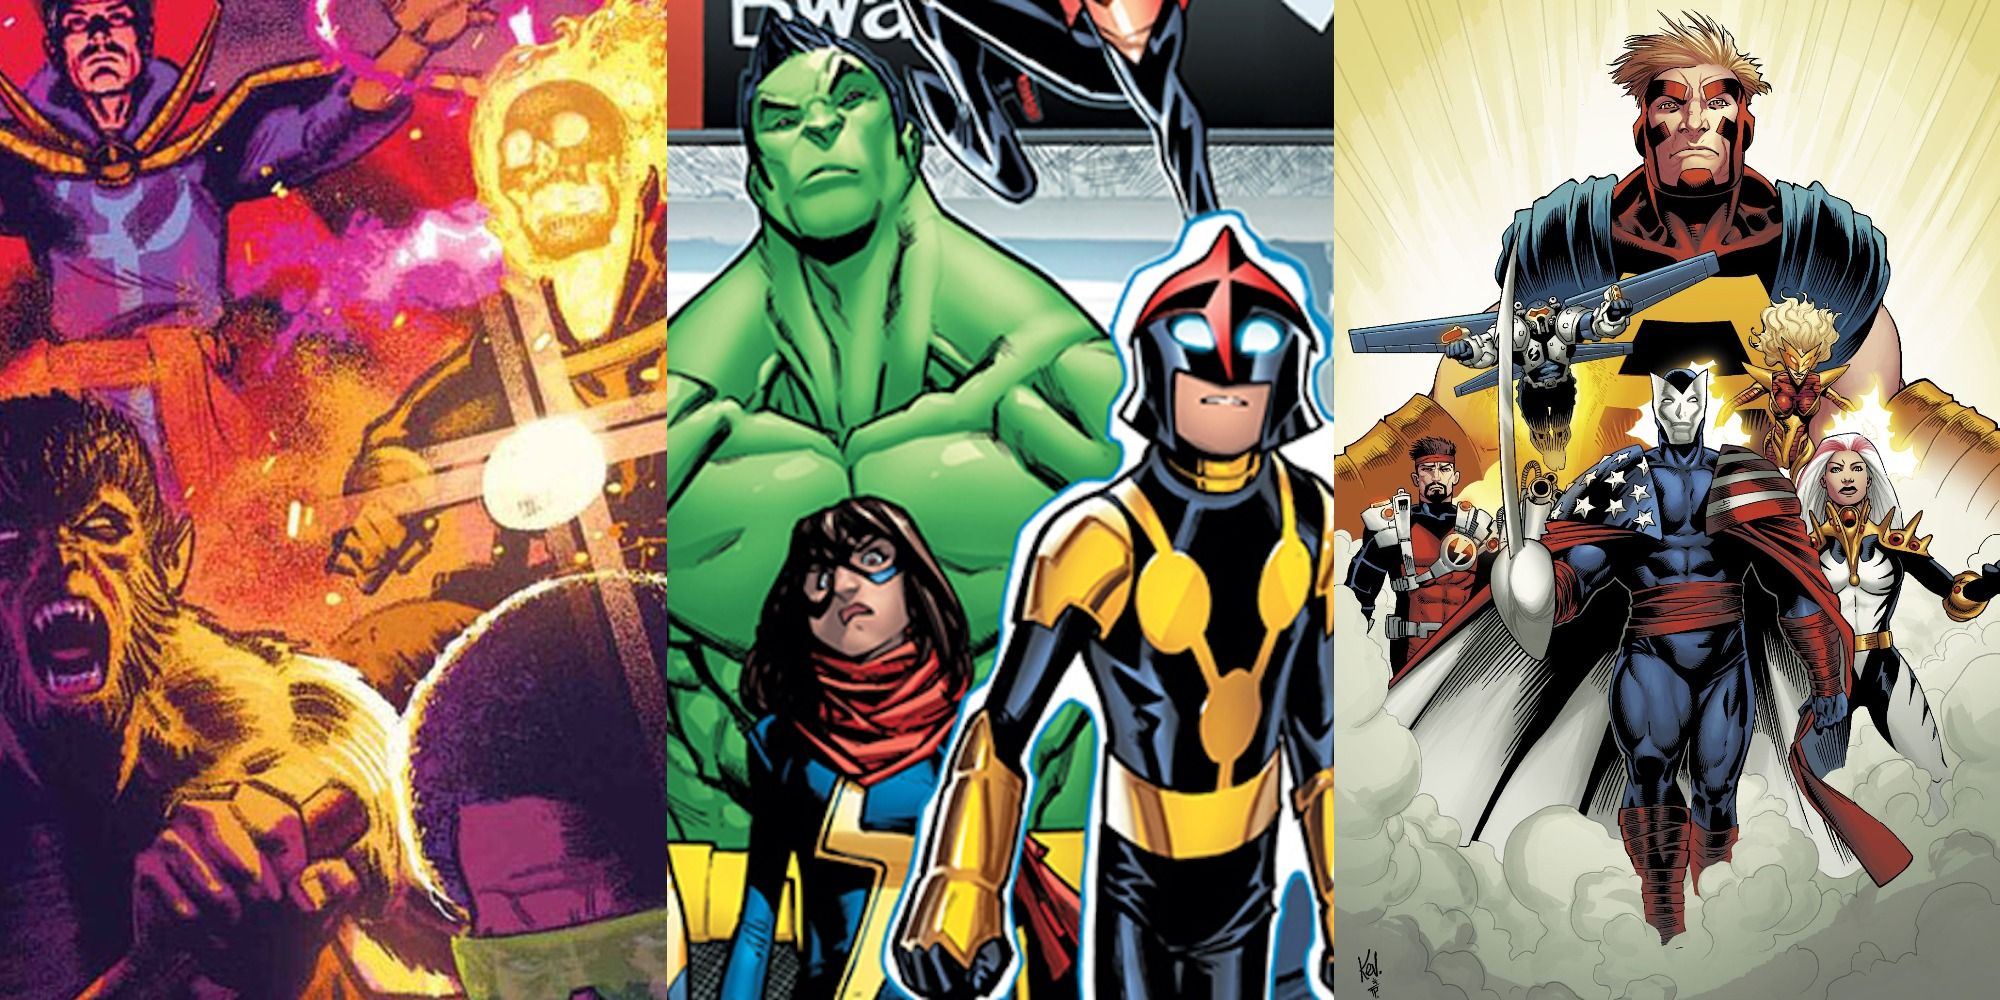 Image featuring the Marvel Teams Midnight Sons, Thunderbolts, Champions